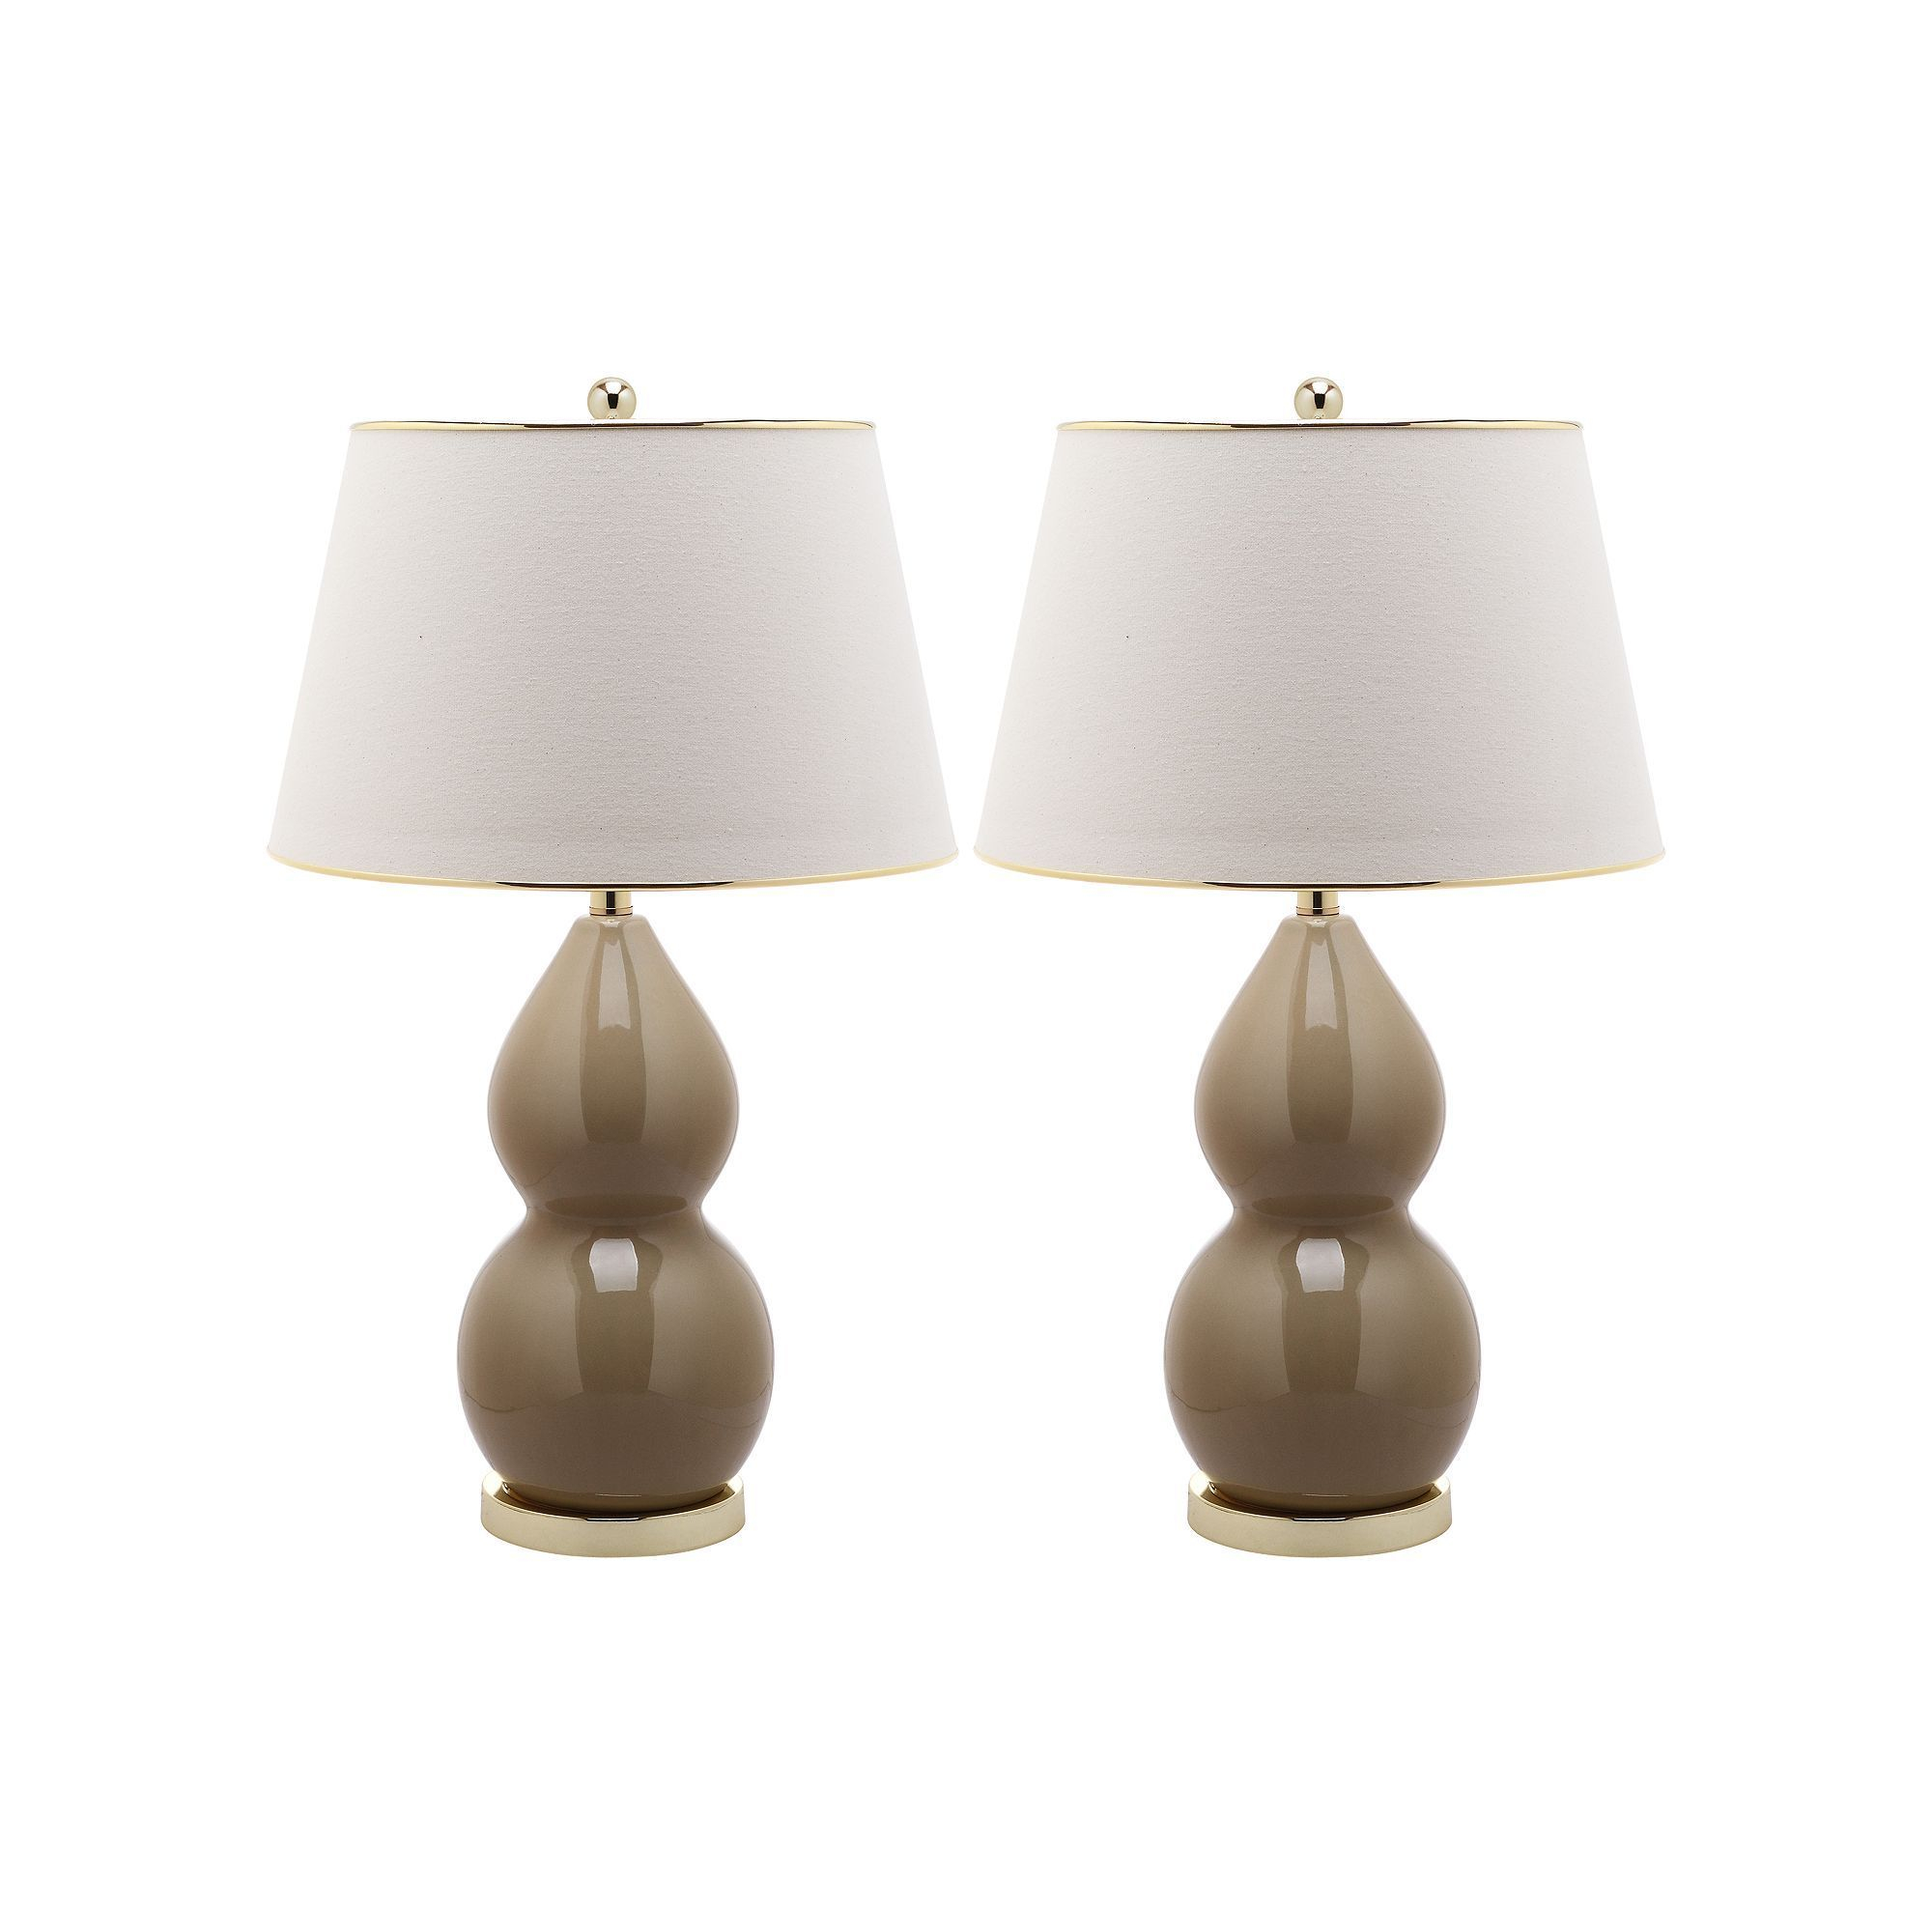 Lighting Fancy Kohls Lamps With Macys Lamps And Girls Room within measurements 2000 X 2000